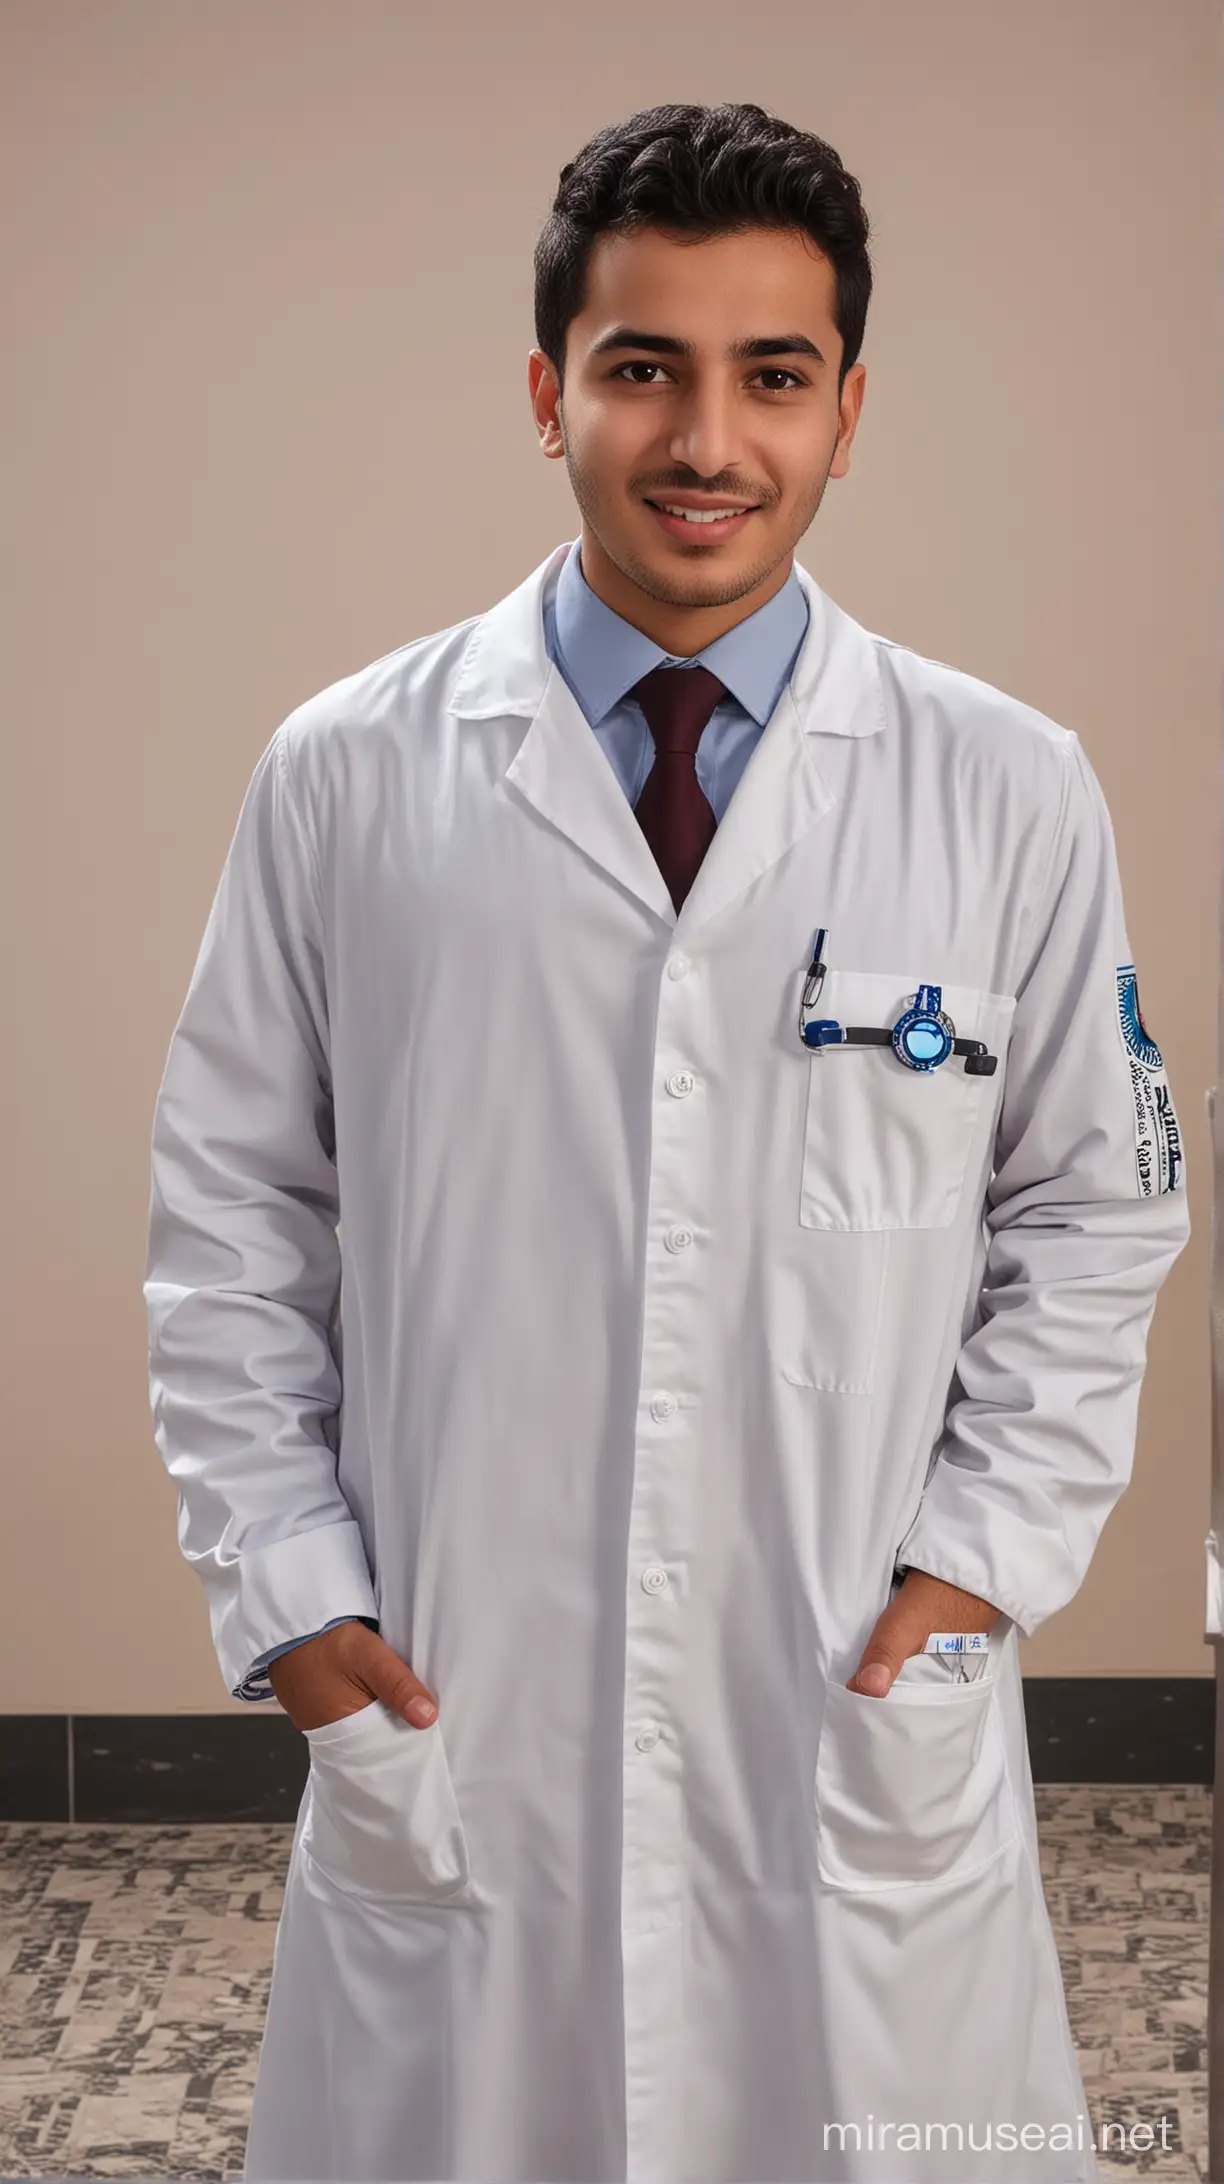 Moroccan Doctor Ahmed Malik in Traditional Attire Providing Medical Care